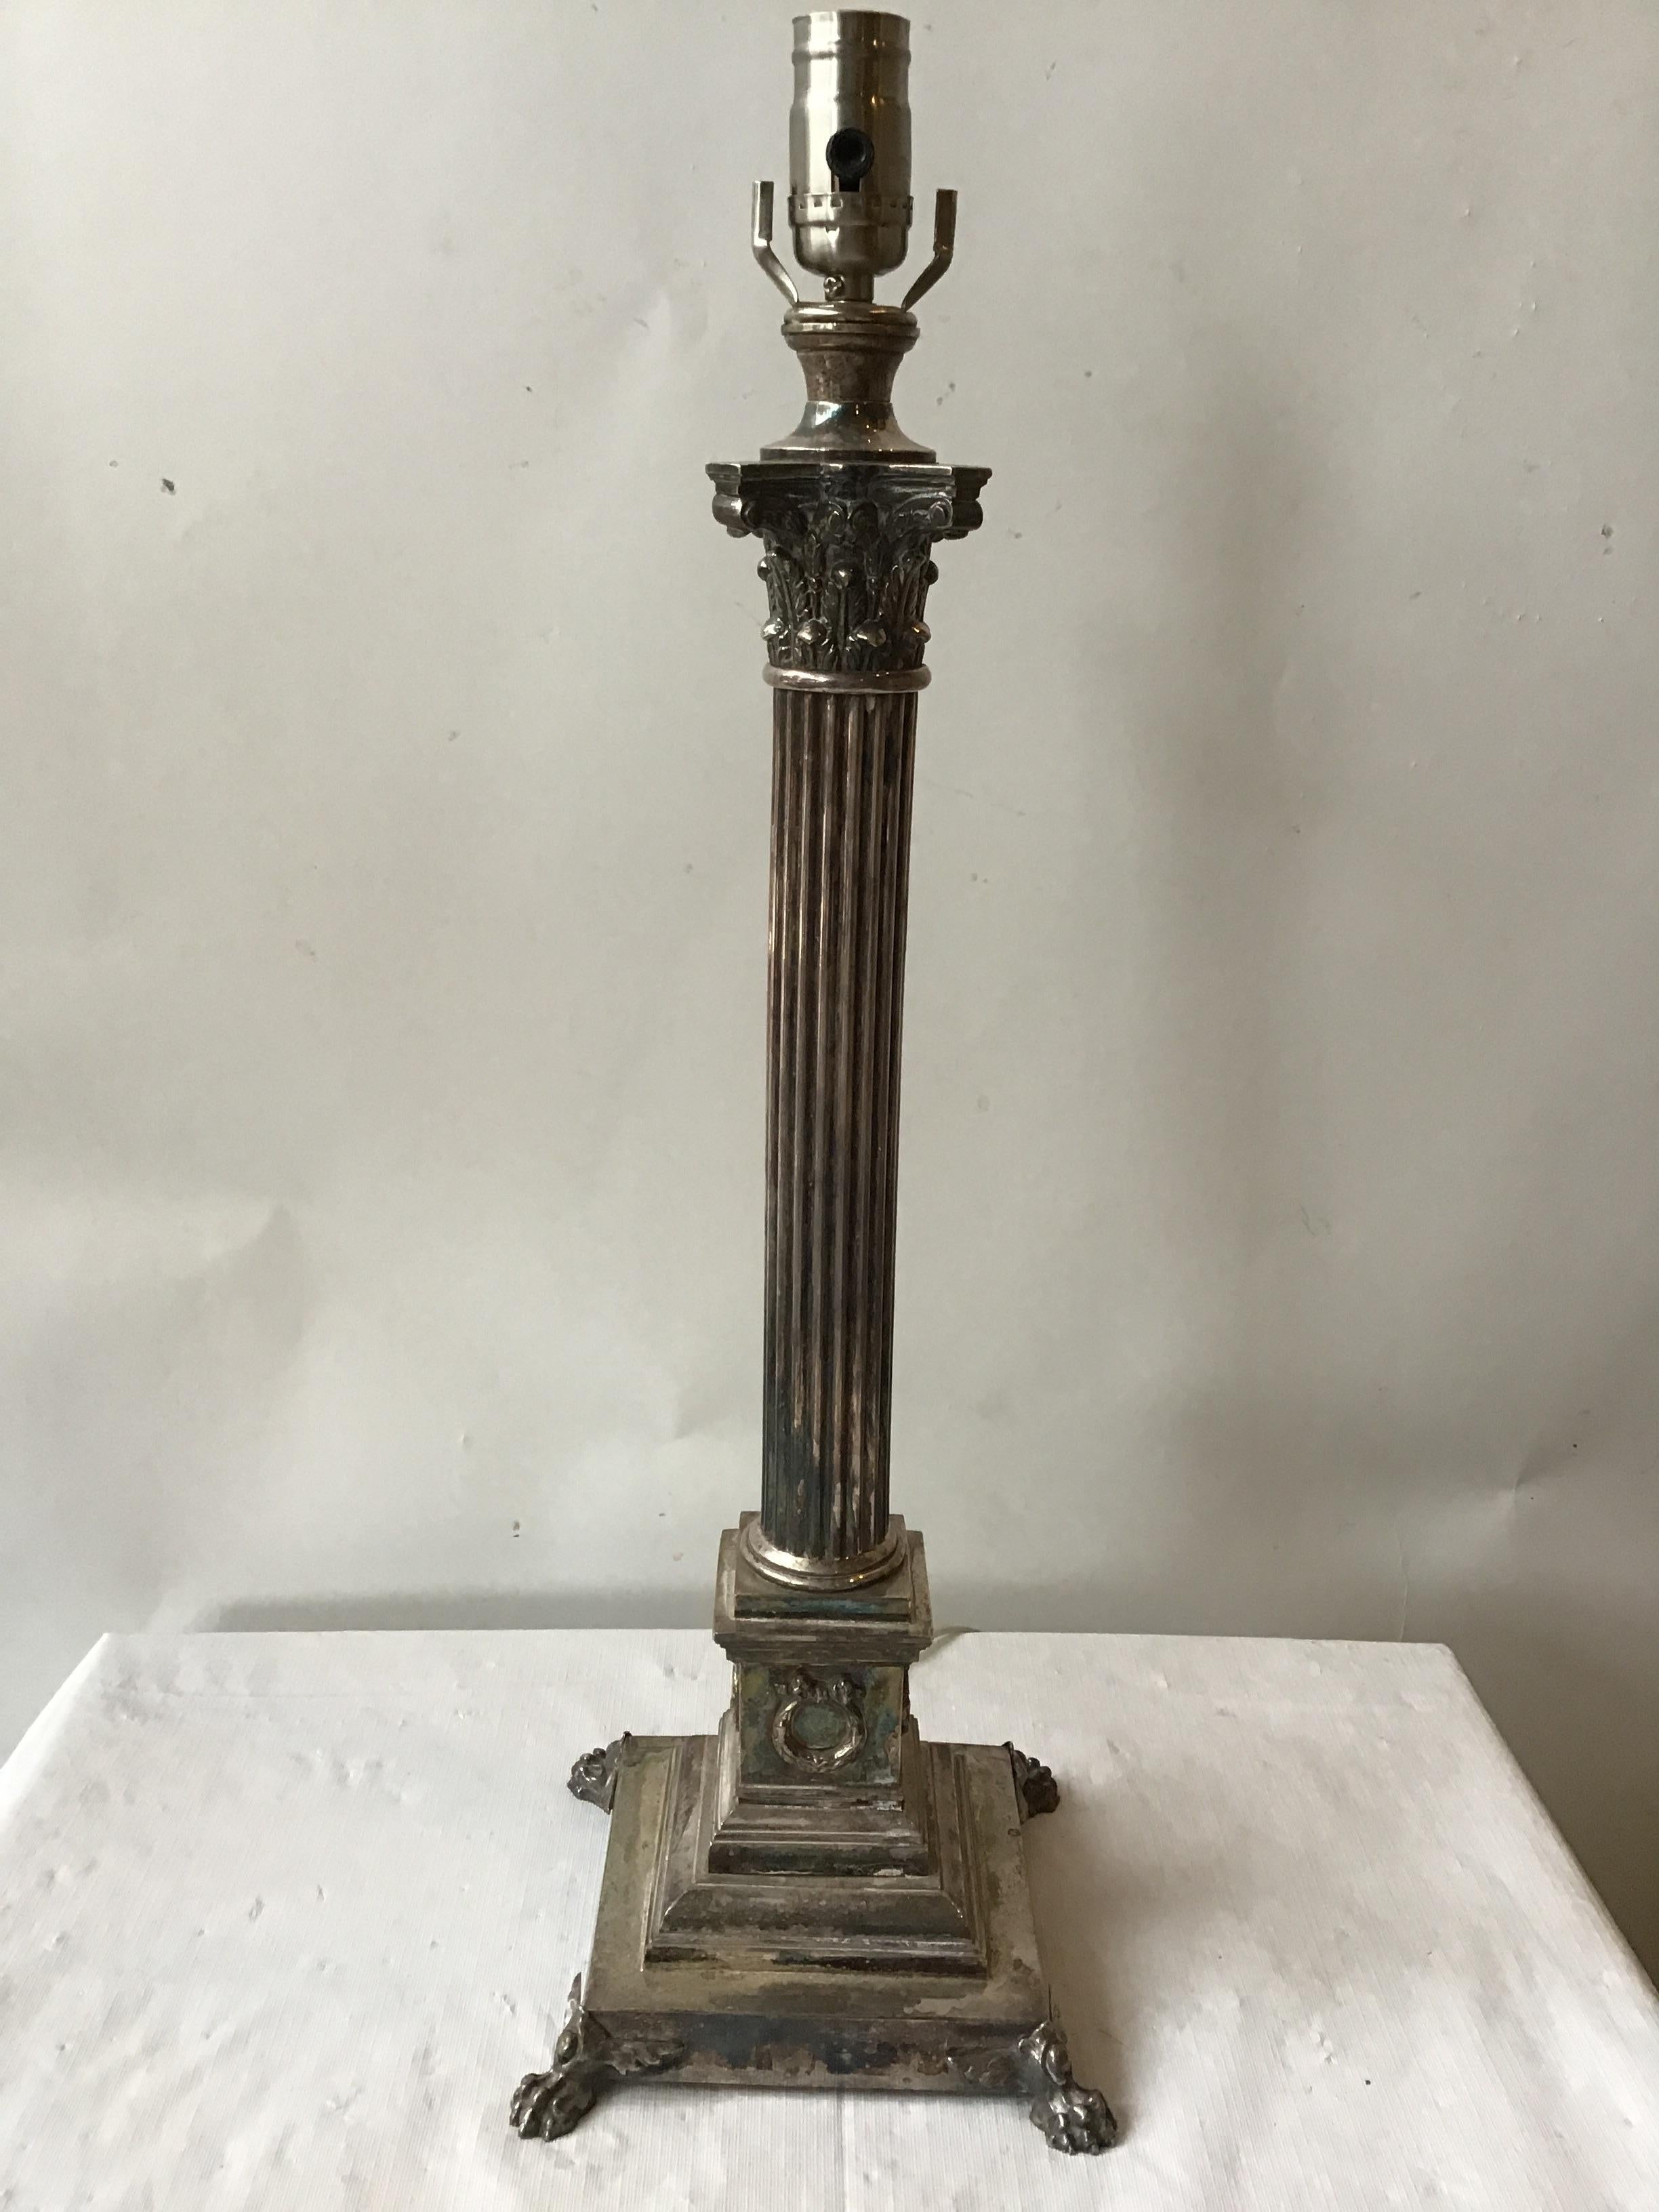 Originally oil lamps. Silver plate column lamps. Plate worn away in areas. Lamps need re wiring.